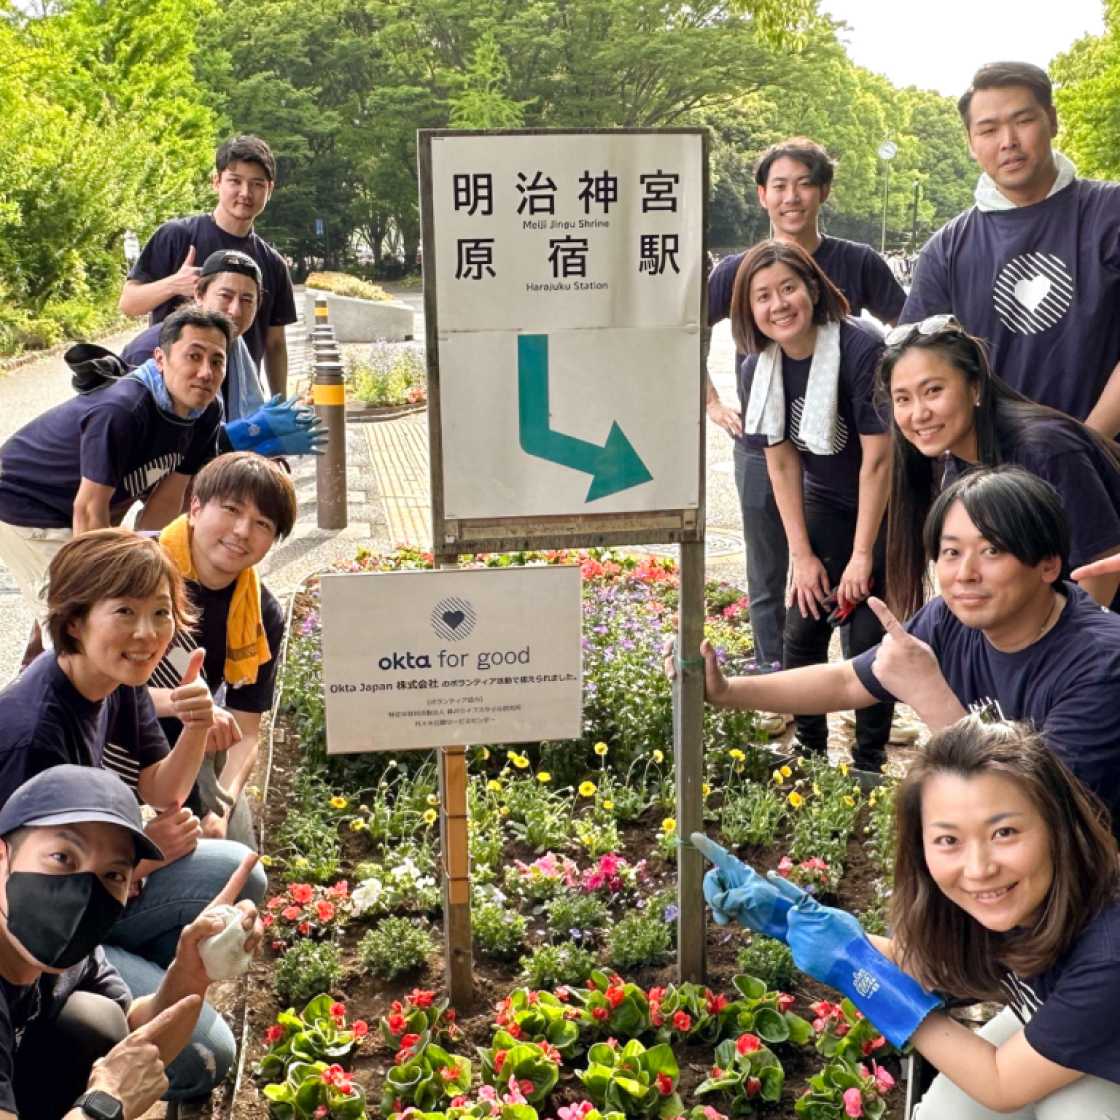 Group of volunteers in garden crowded around sign that says Okta for Good and another sign in Japanese